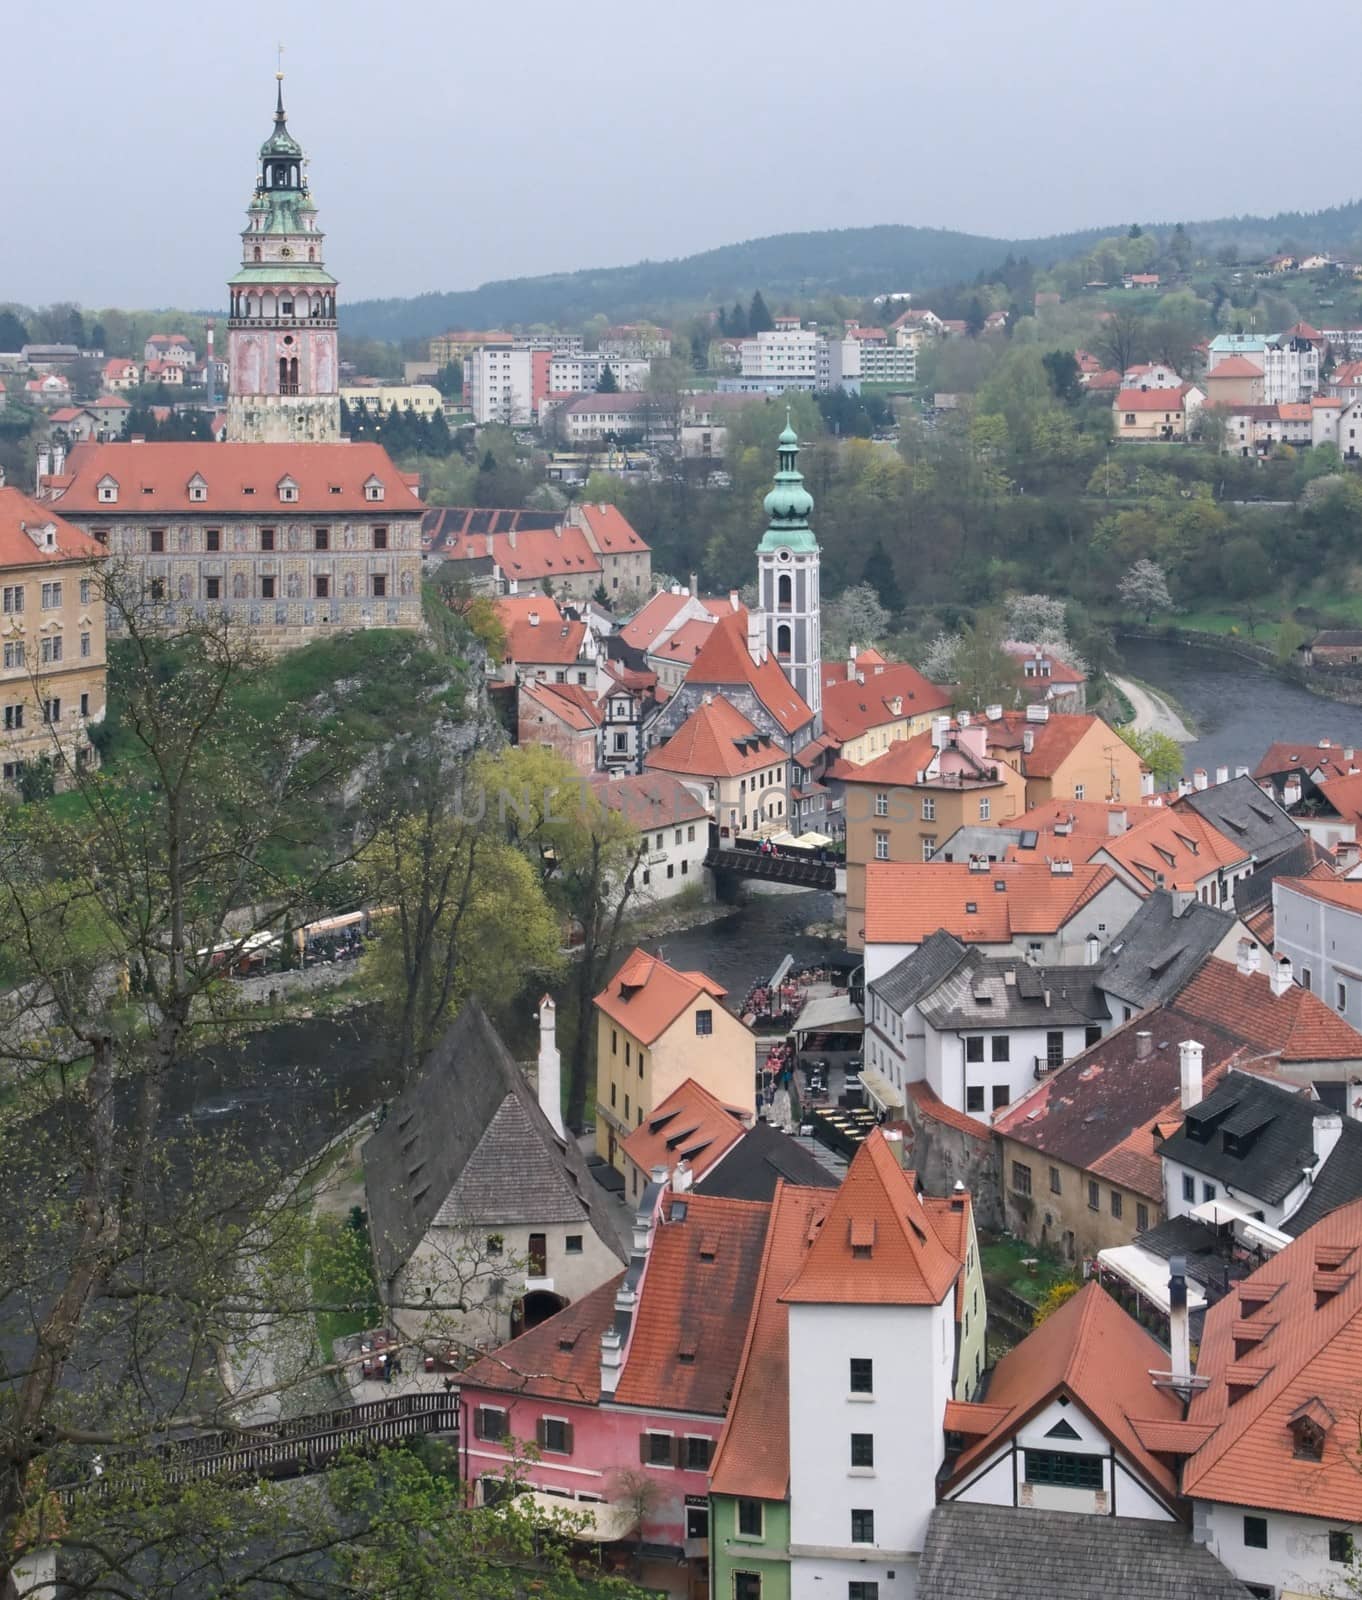 View of Cesky Krumlov, a small town in the south of the Czech Republic